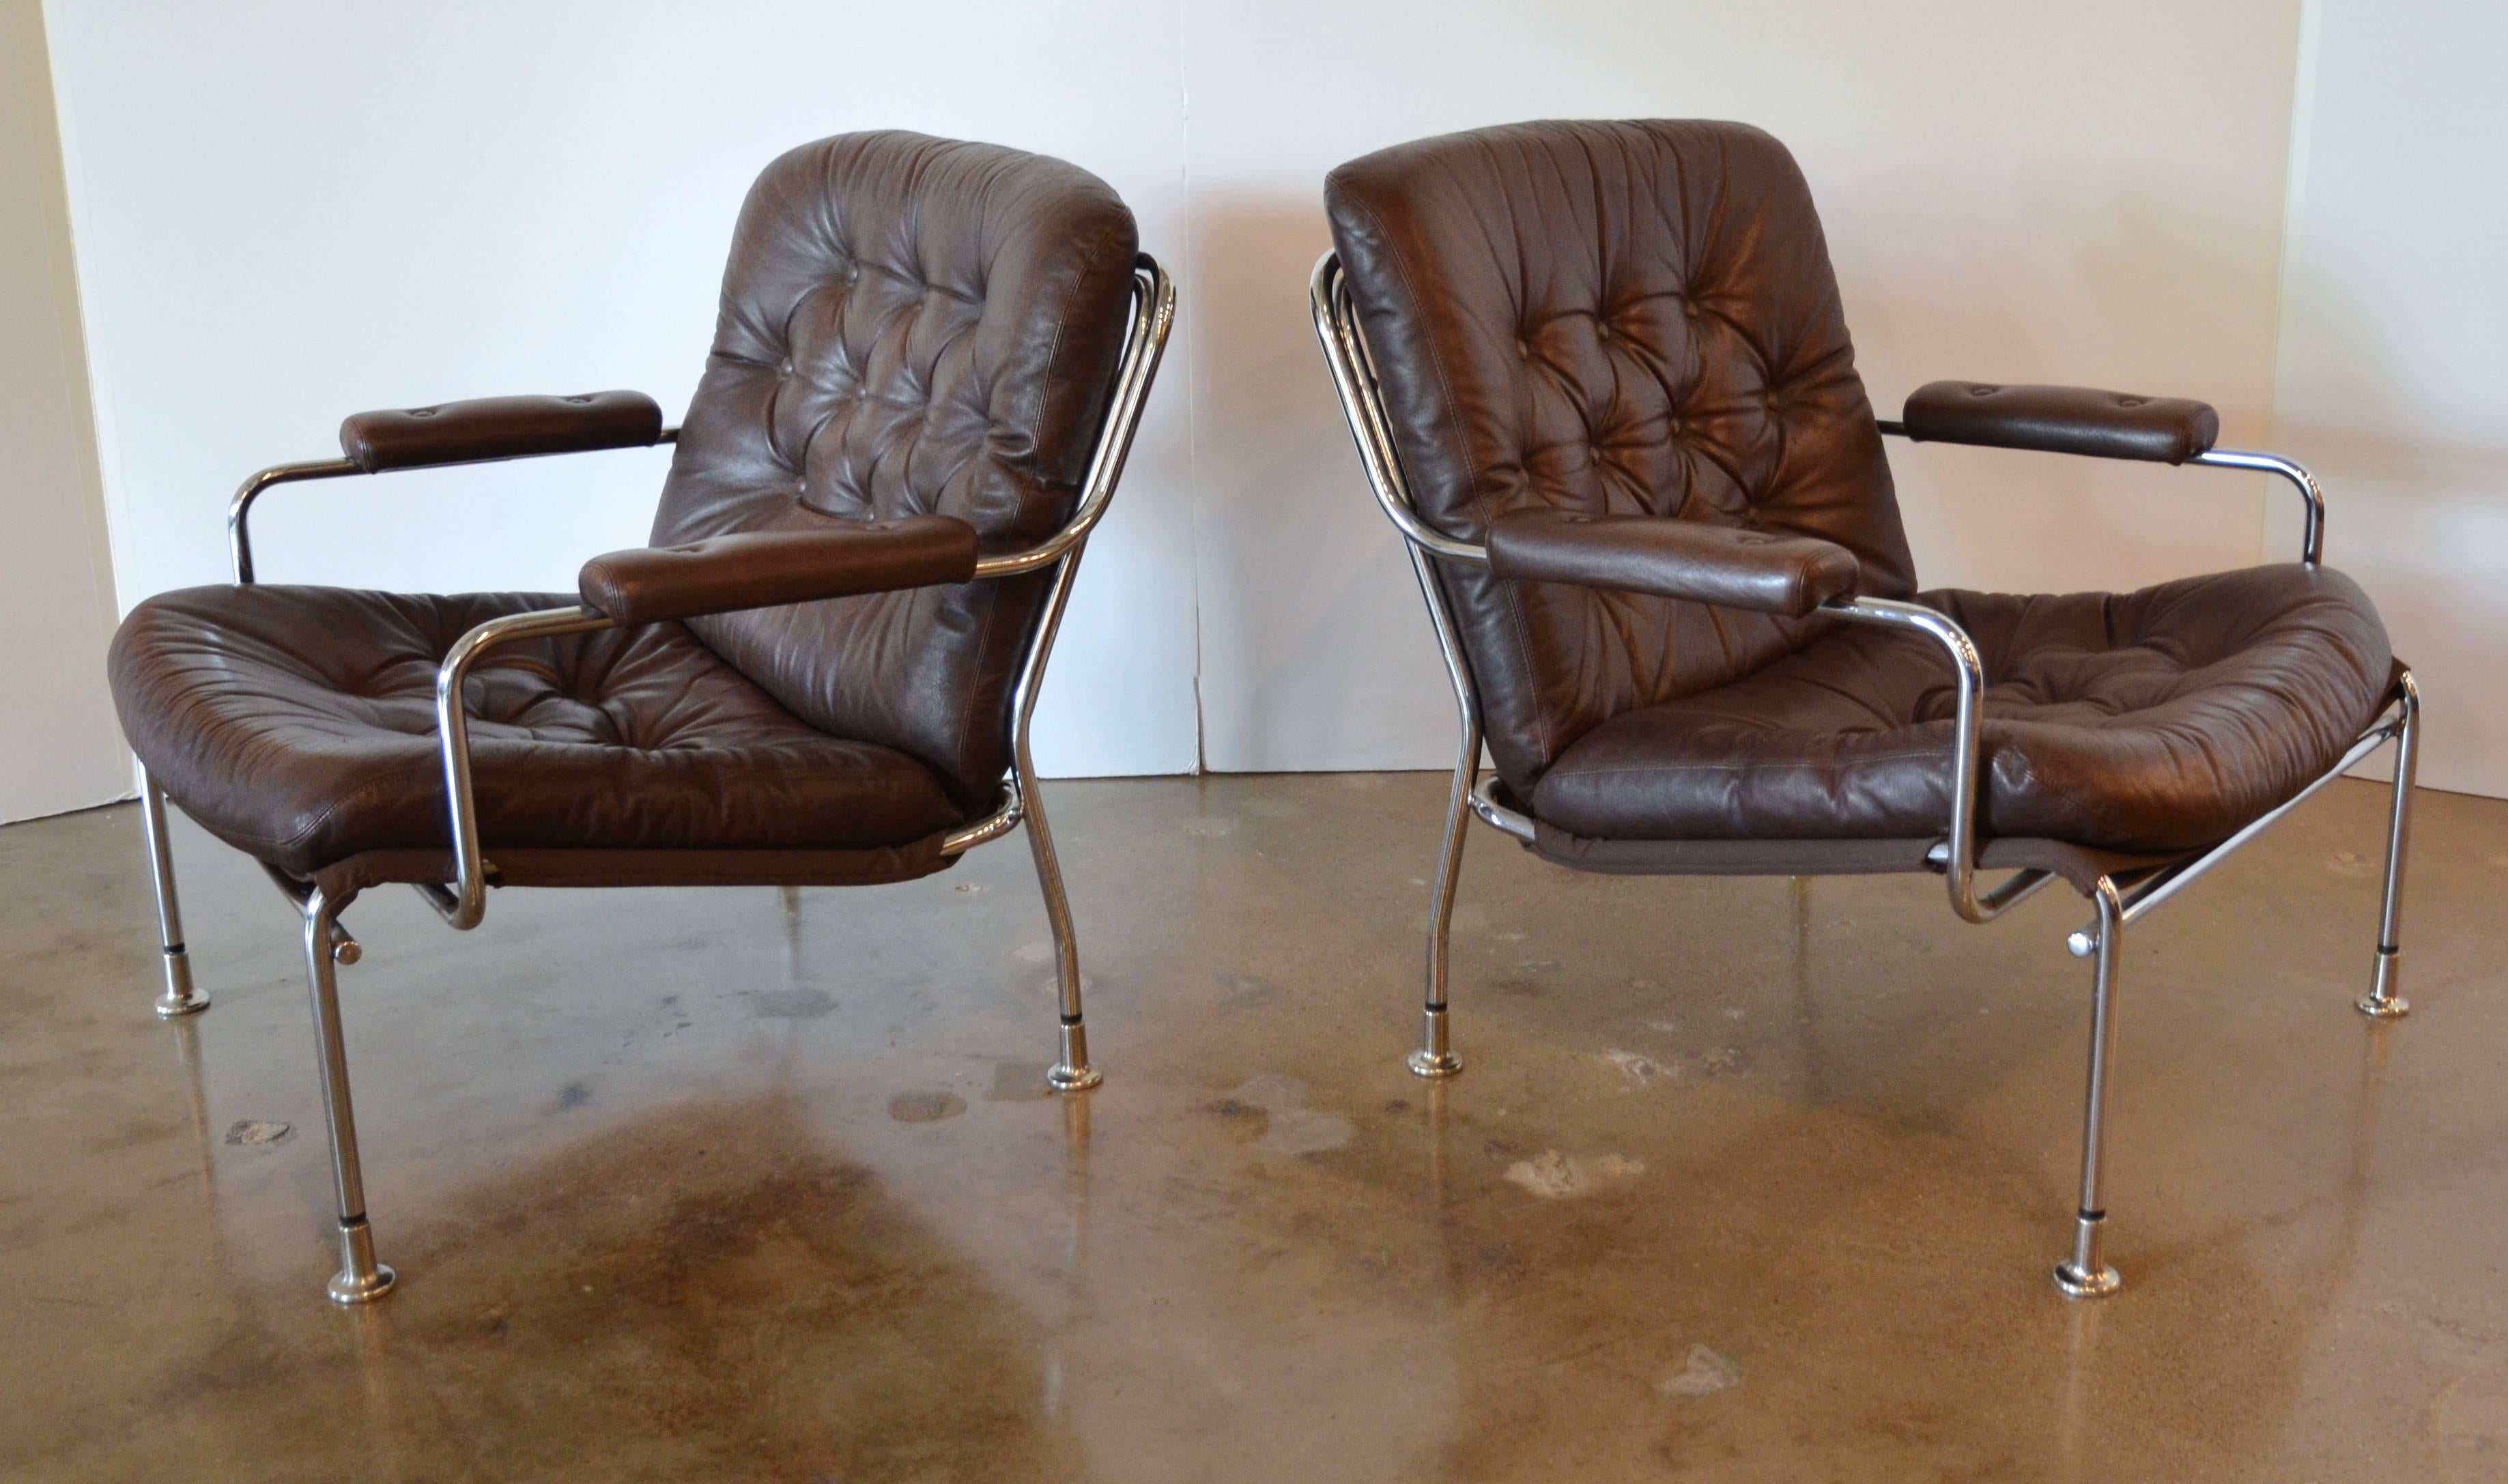 Late 20th Century Swedish Chrome and Leather Armchair Attributed to Bruno Mathsson for DUX